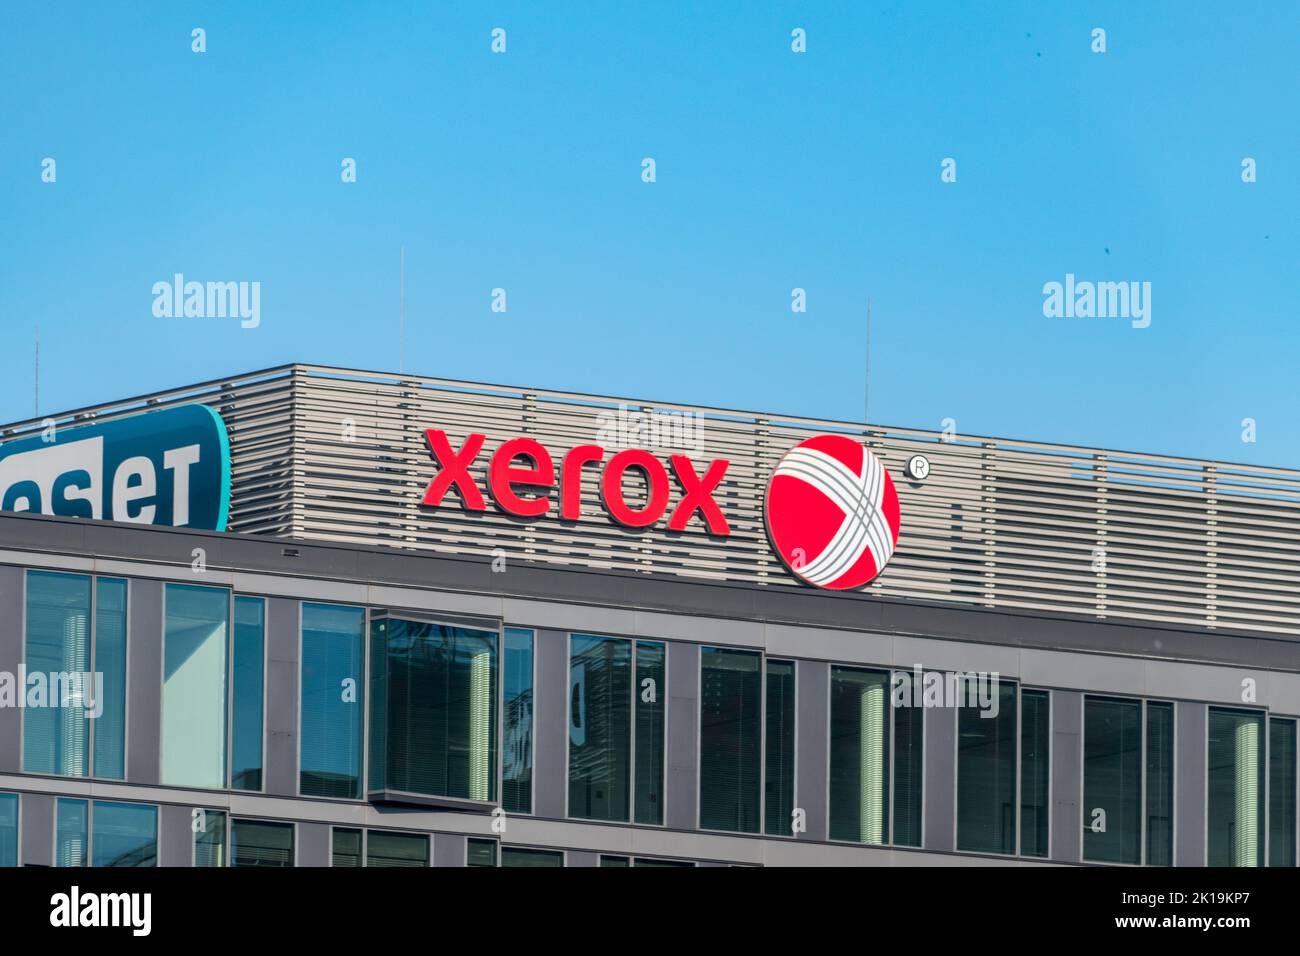 Bratislava, Slovakia - May 31, 2022: Logo and sign of Xerox. Xerox is an American corporation that sells print and digital document products and servi Stock Photo